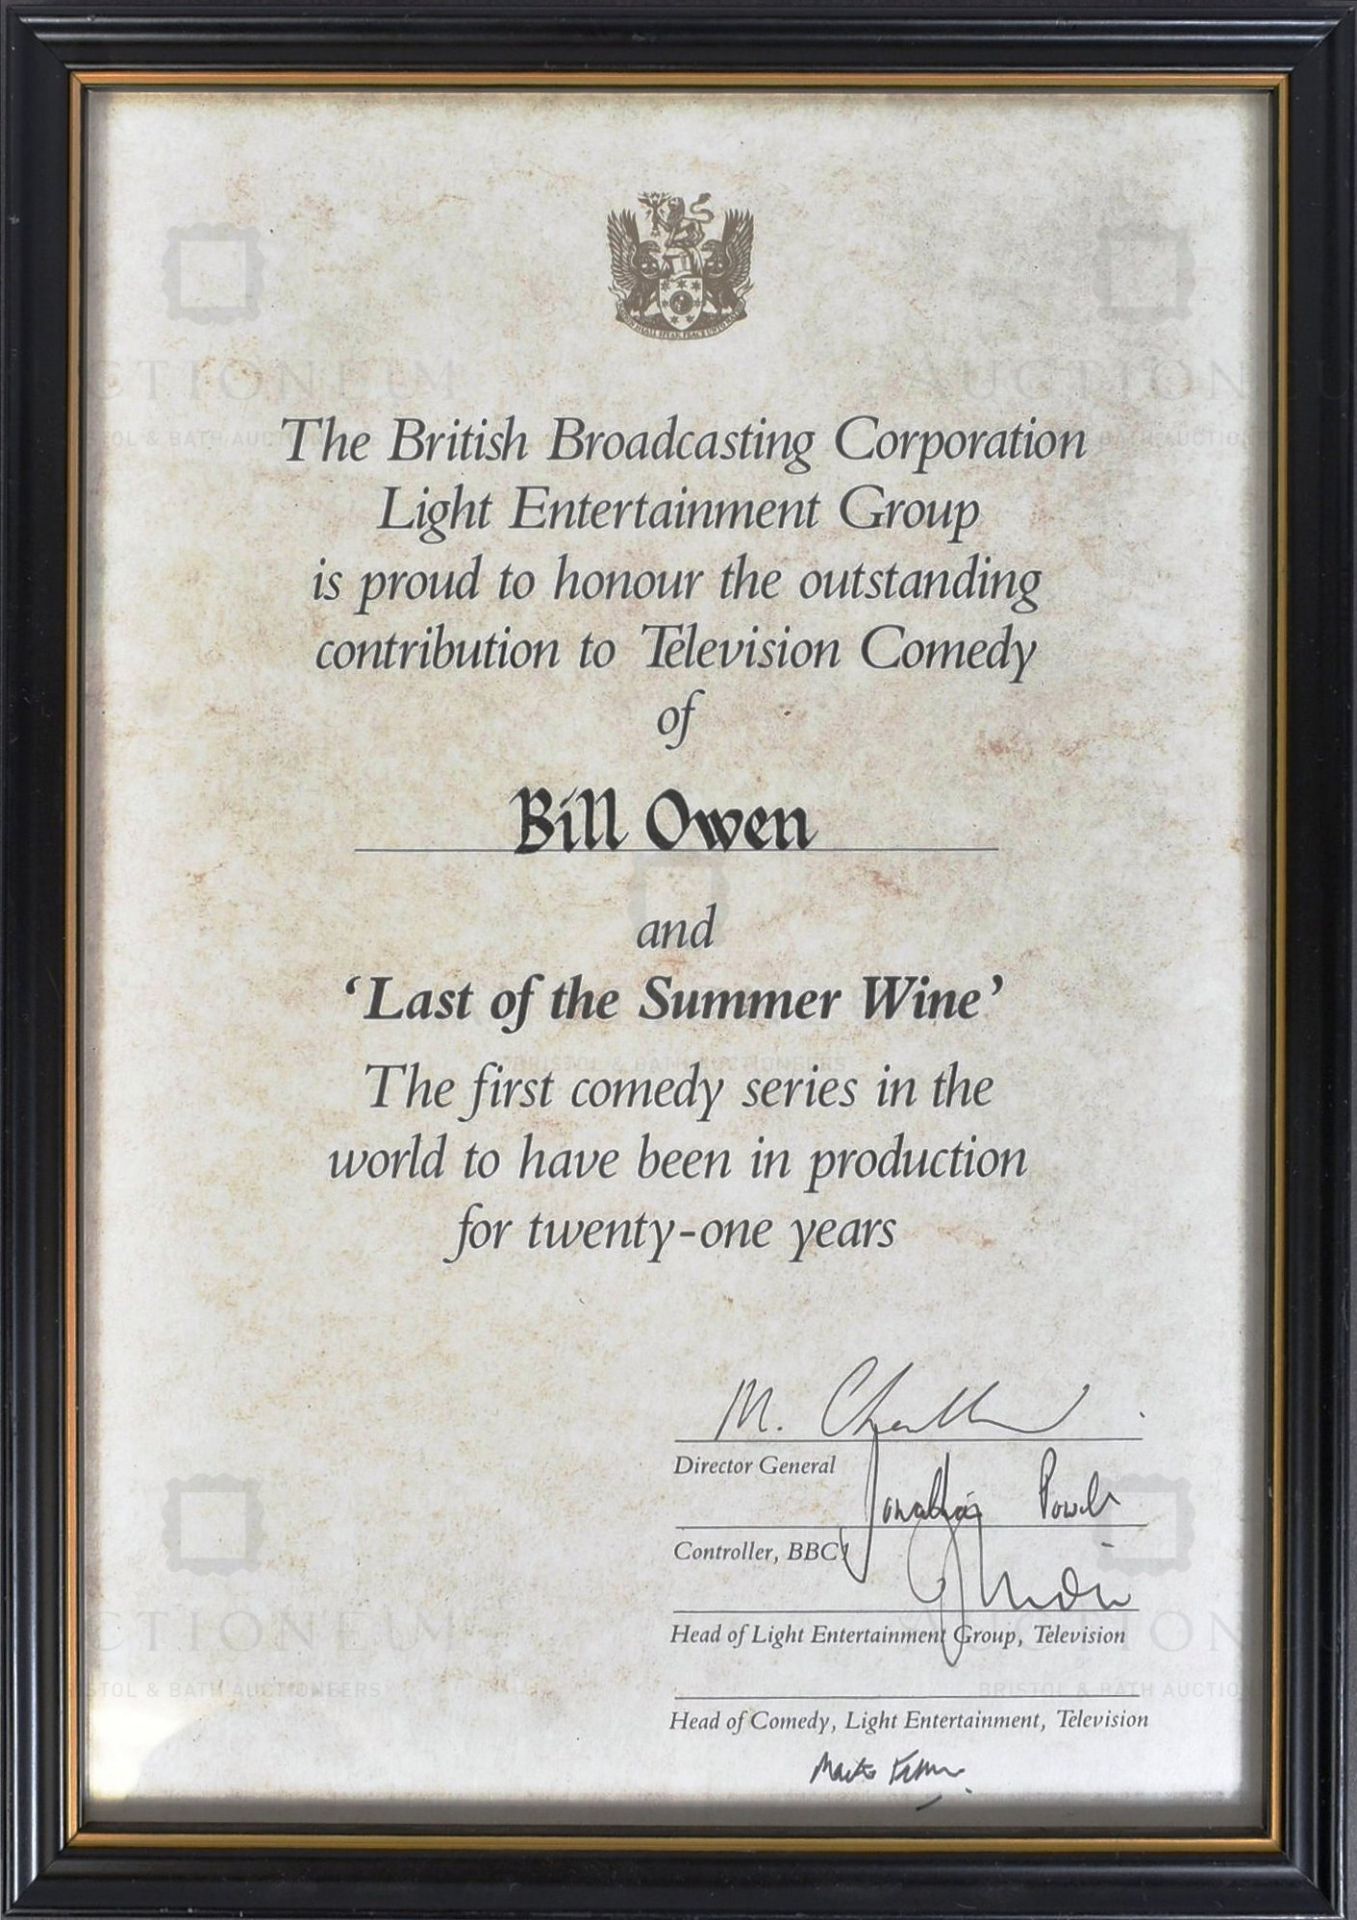 FROM THE ESTATES OF BILL & TOM OWEN - LAST OF THE SUMMER WINE